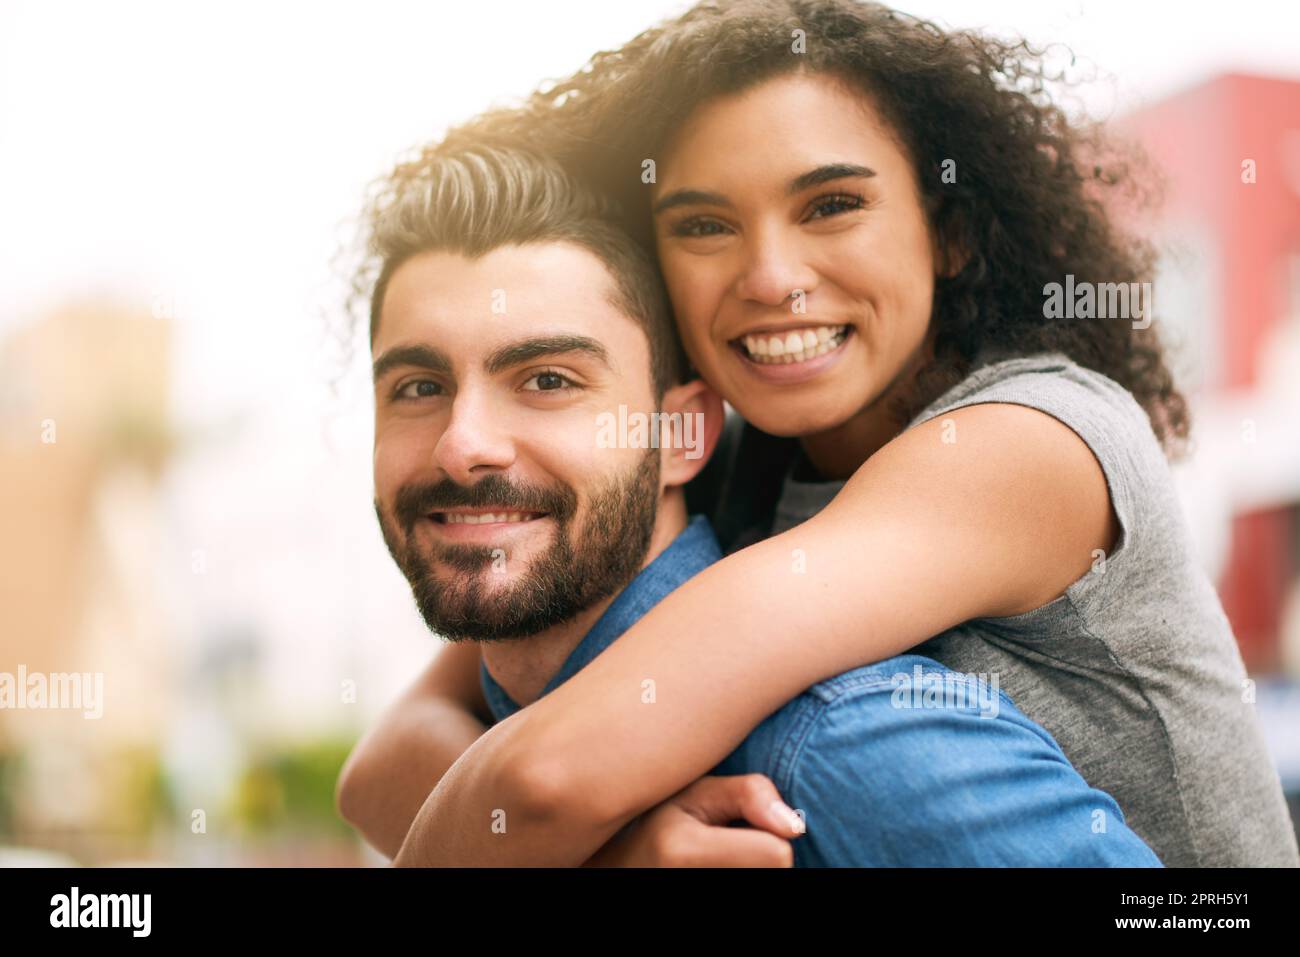 Shes not shy to crack an authentic smile. a playful couple out in the city together. Stock Photo